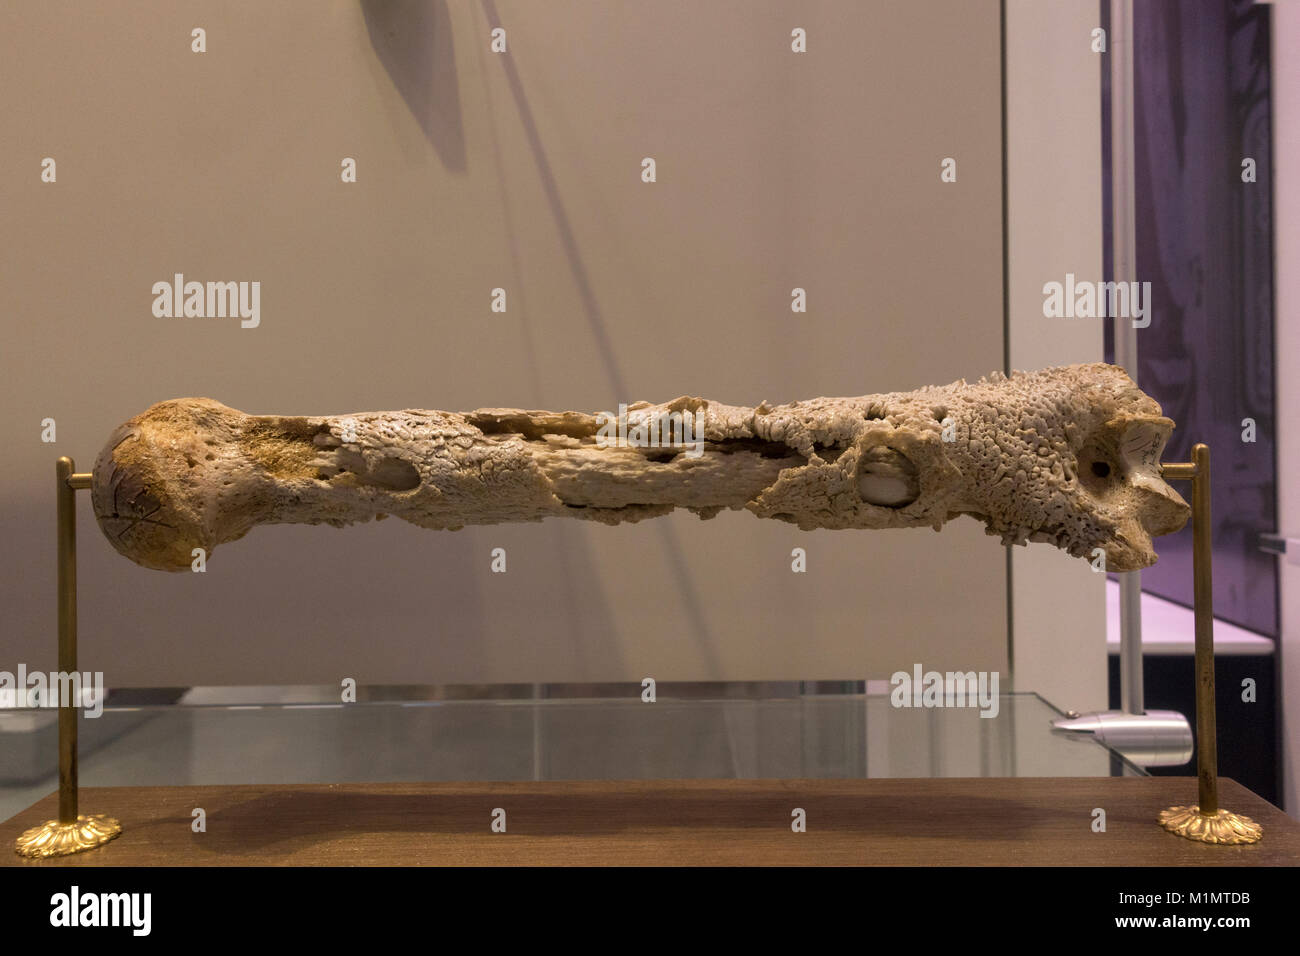 A human humerus with gunshot wound following infection on display in the National Museum of Health and Medicine, Silver Spring, MD, USA. Stock Photo